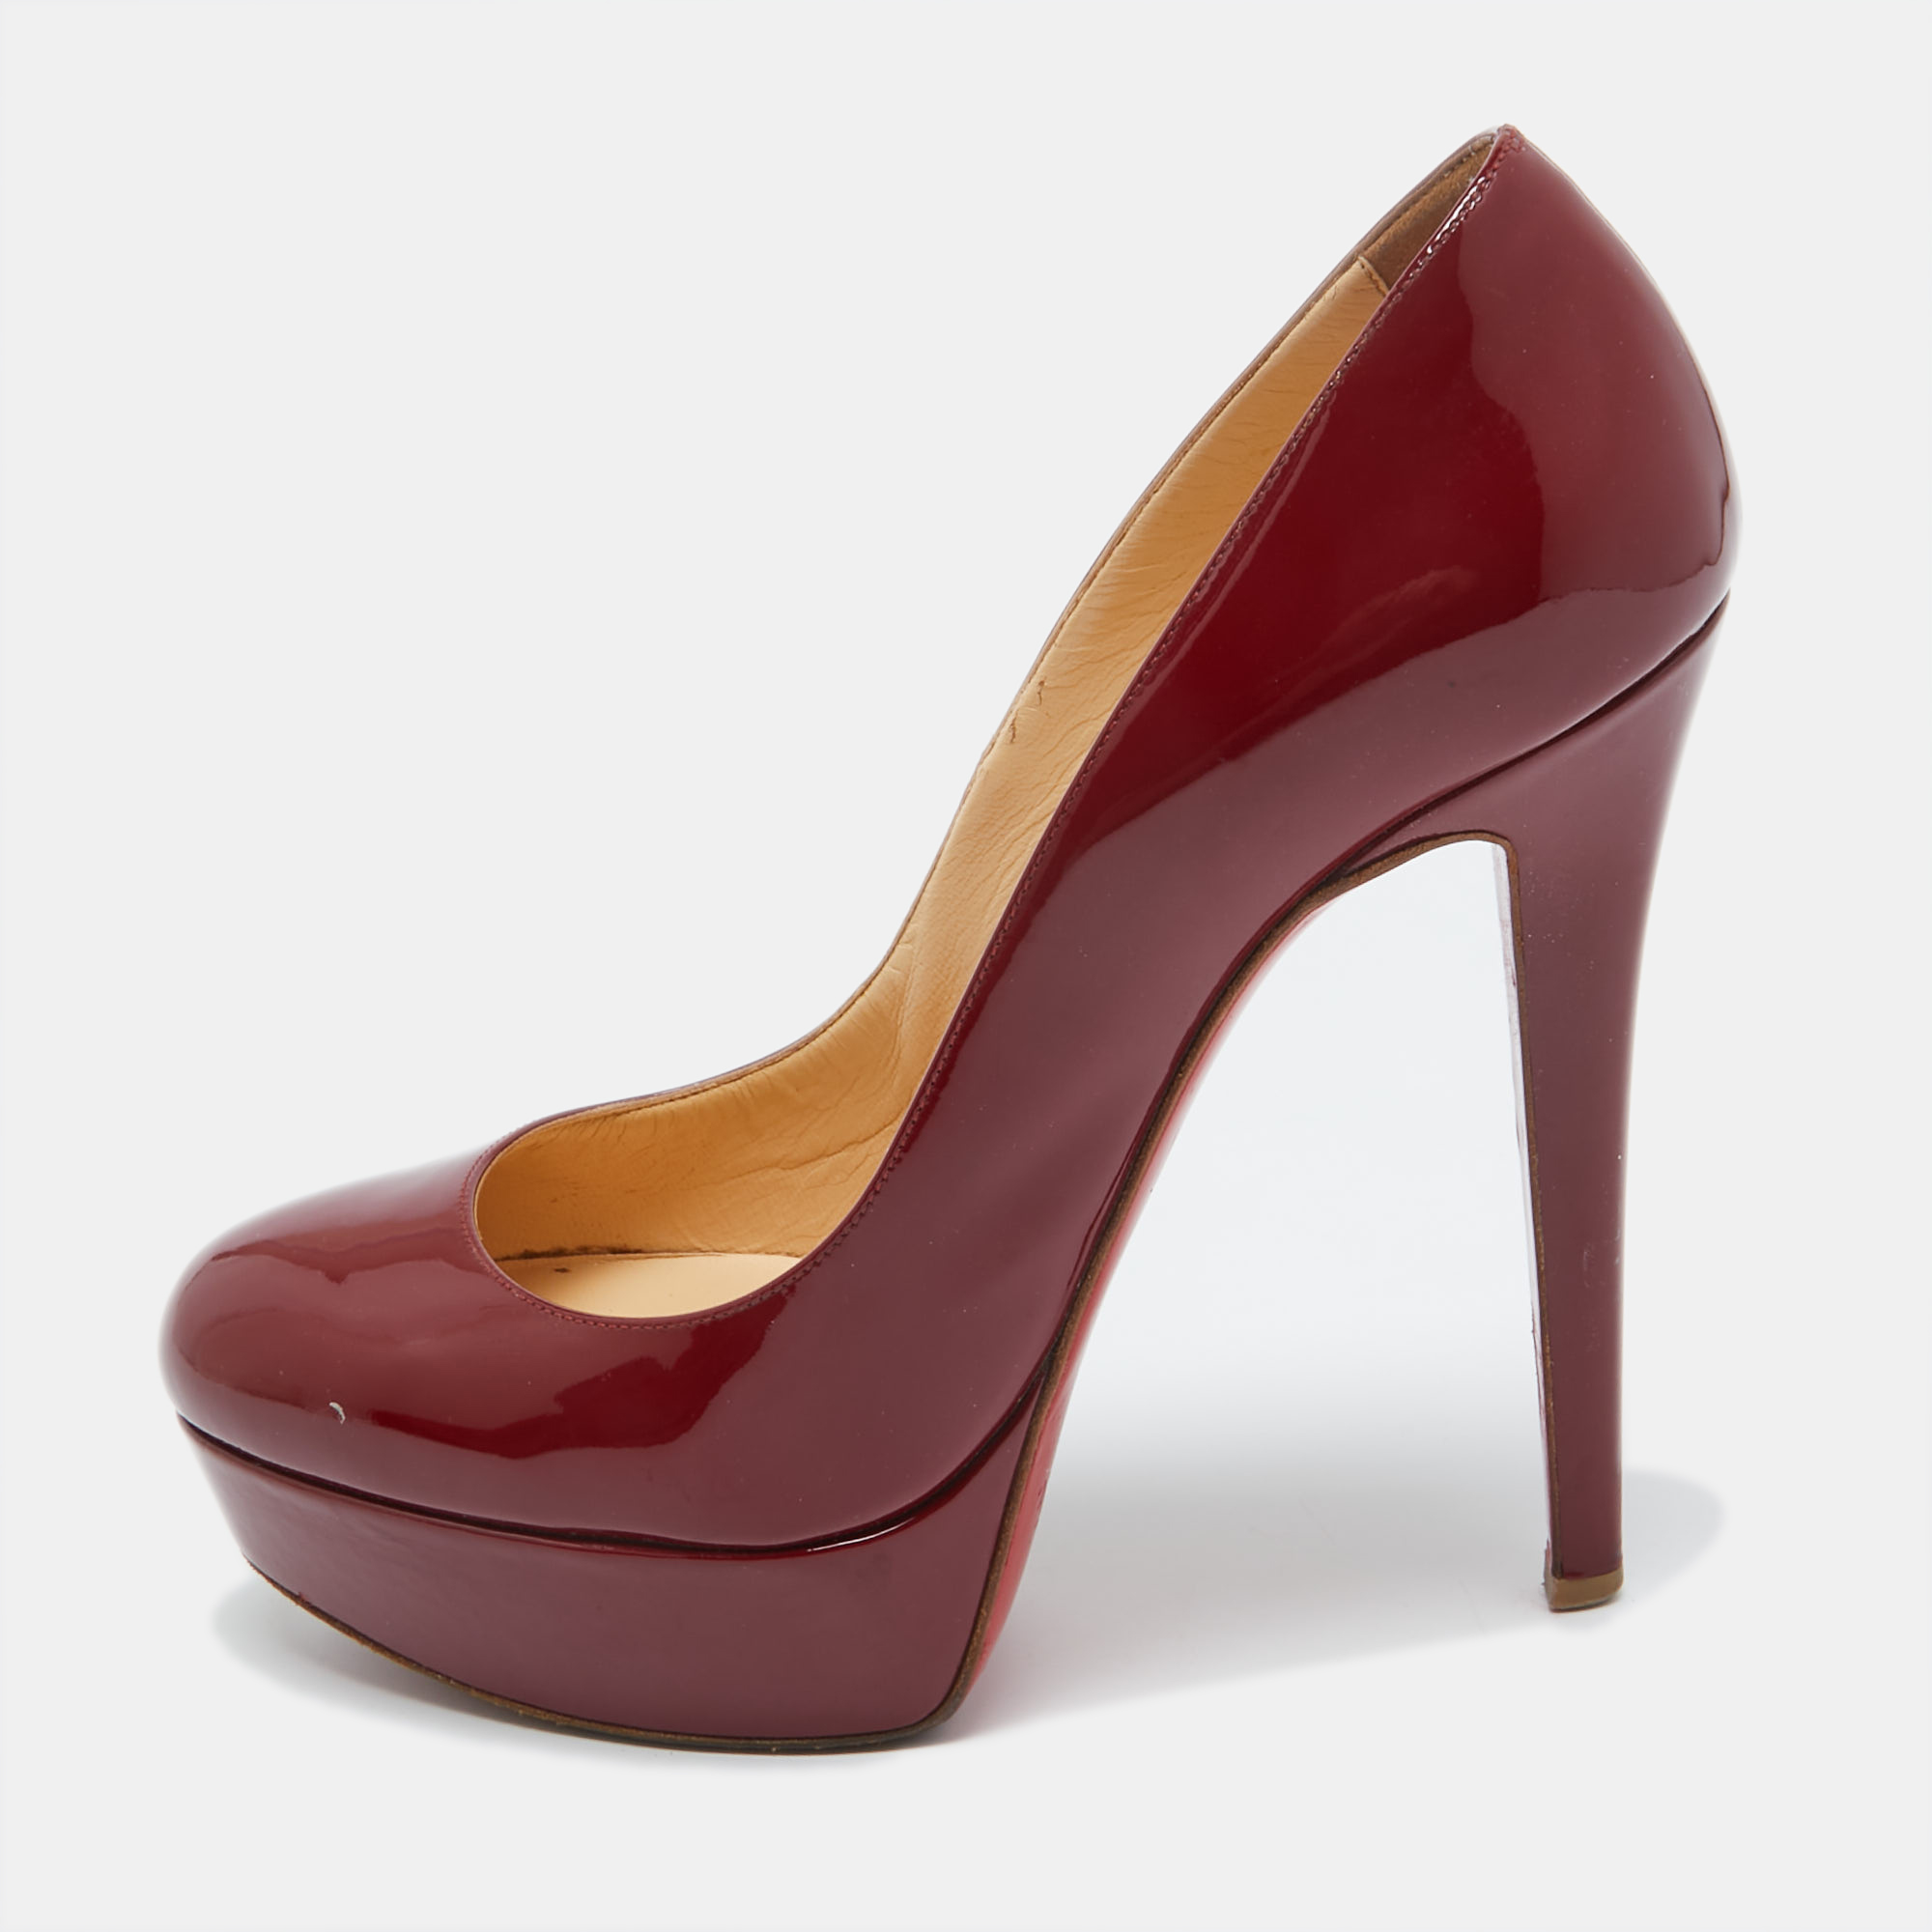 Christian Louboutin Dark Red Patent Leather Bianca Pumps Size 37